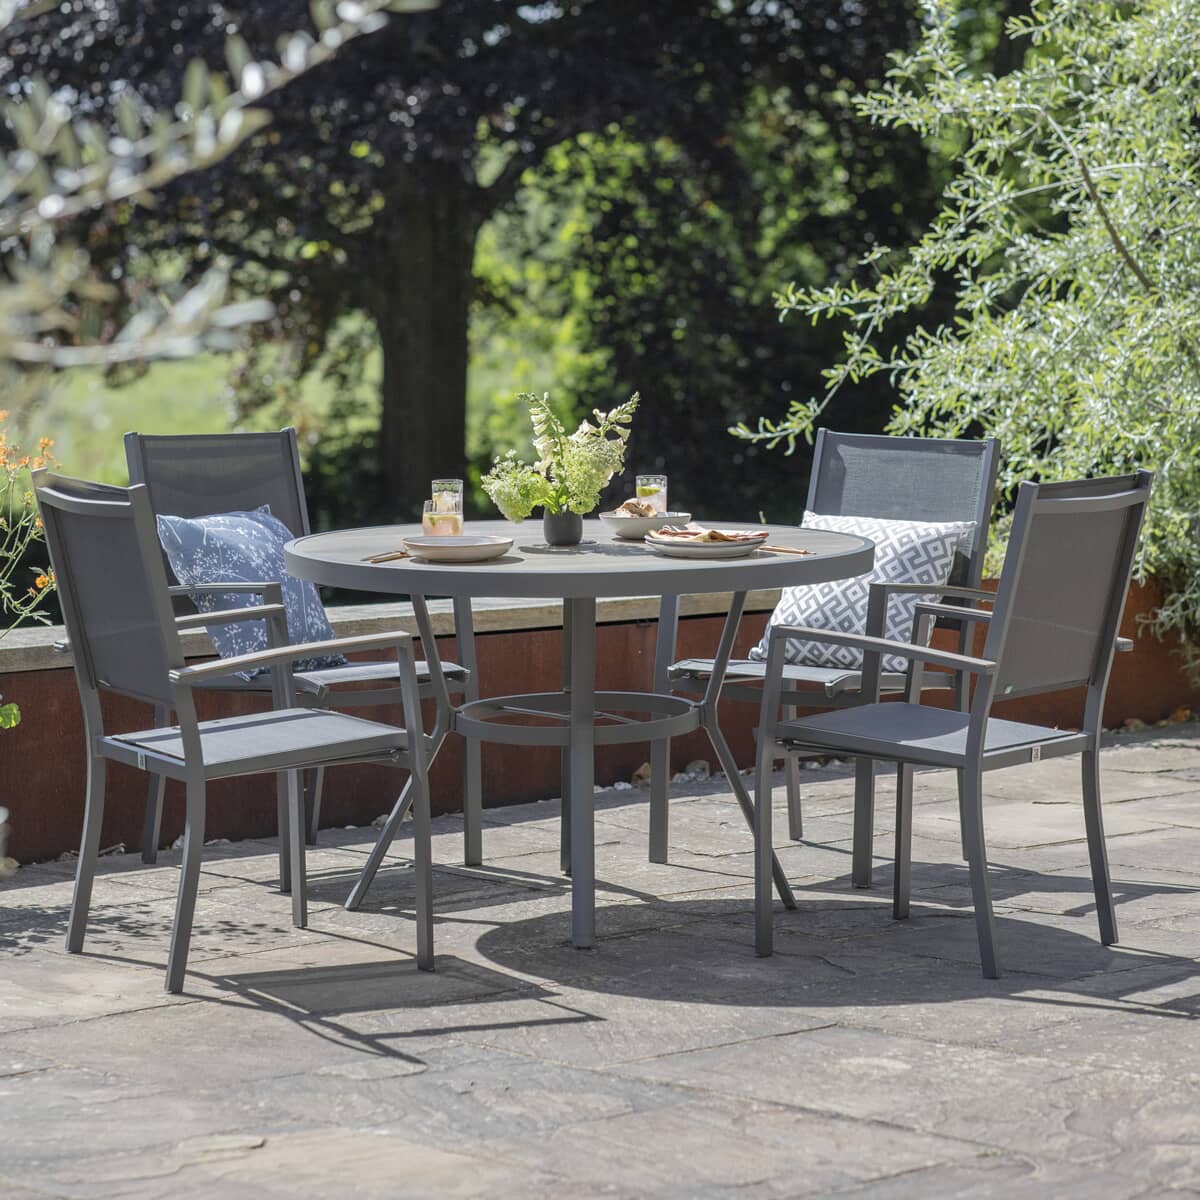 LG Outdoor Monza 4 Seat Dining Set with Sling Armchairs